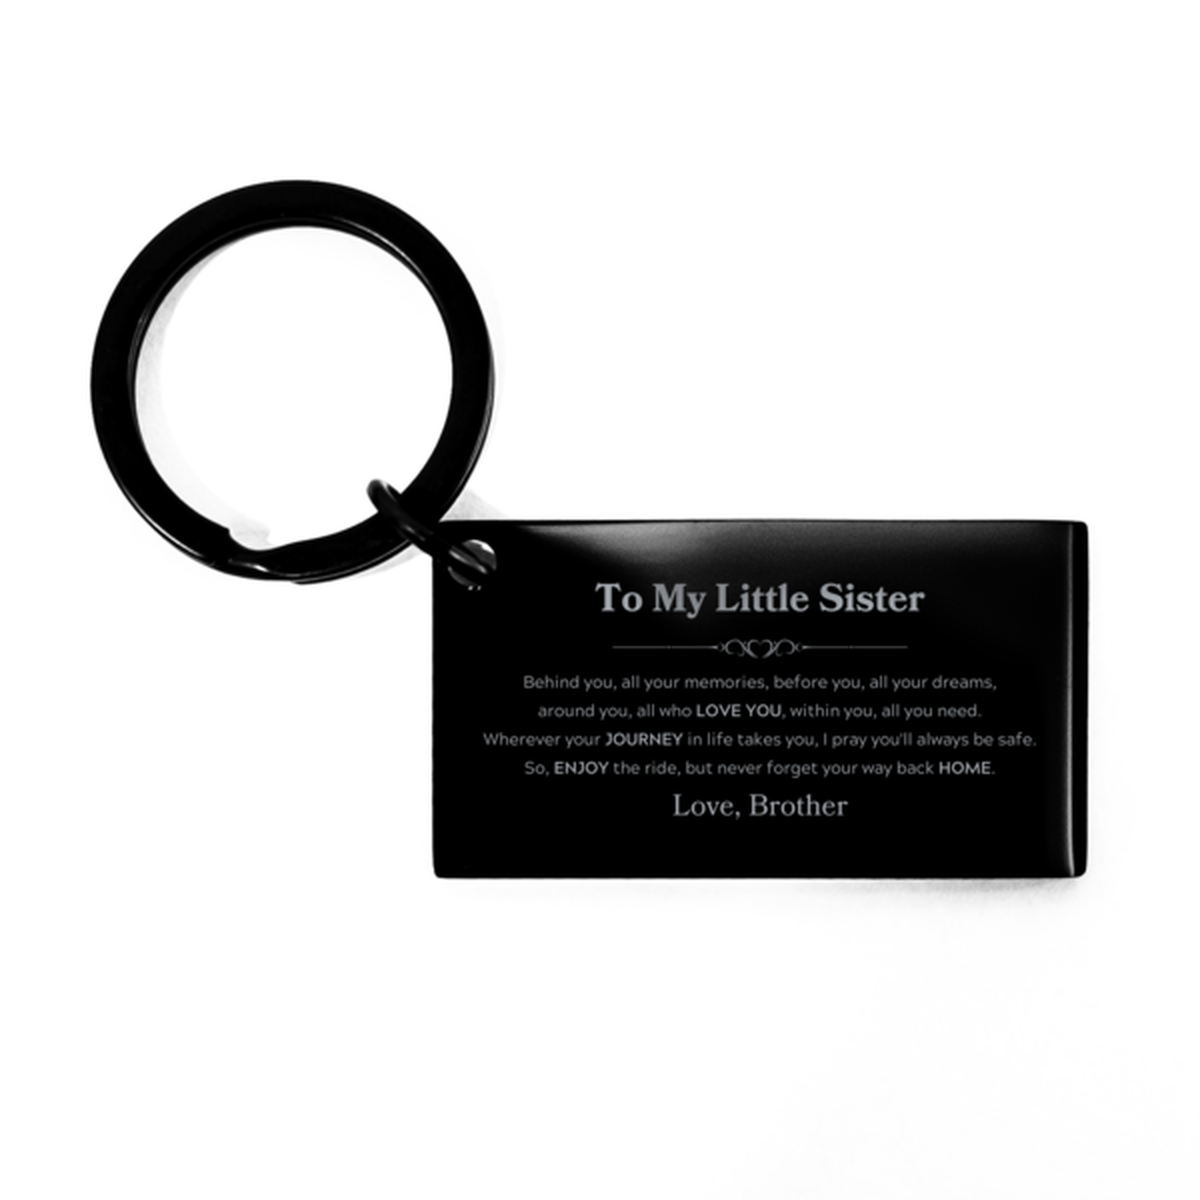 To My Little Sister Graduation Gifts from Brother, Little Sister Keychain Christmas Birthday Gifts for Little Sister Behind you, all your memories, before you, all your dreams. Love, Brother